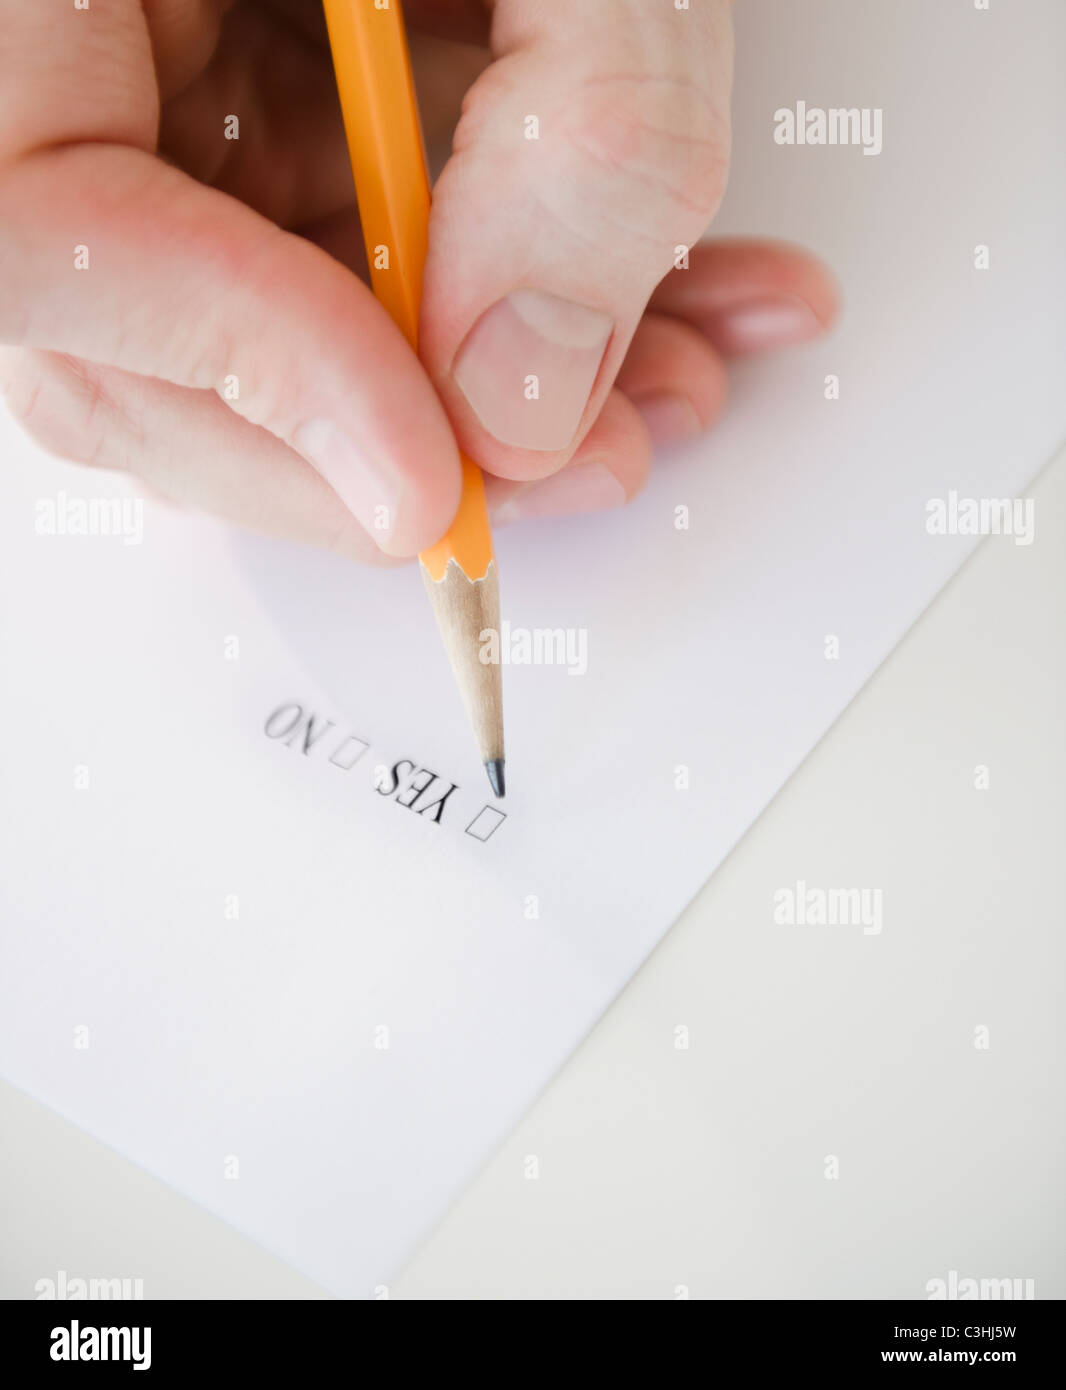 Hand filling document Stock Photo